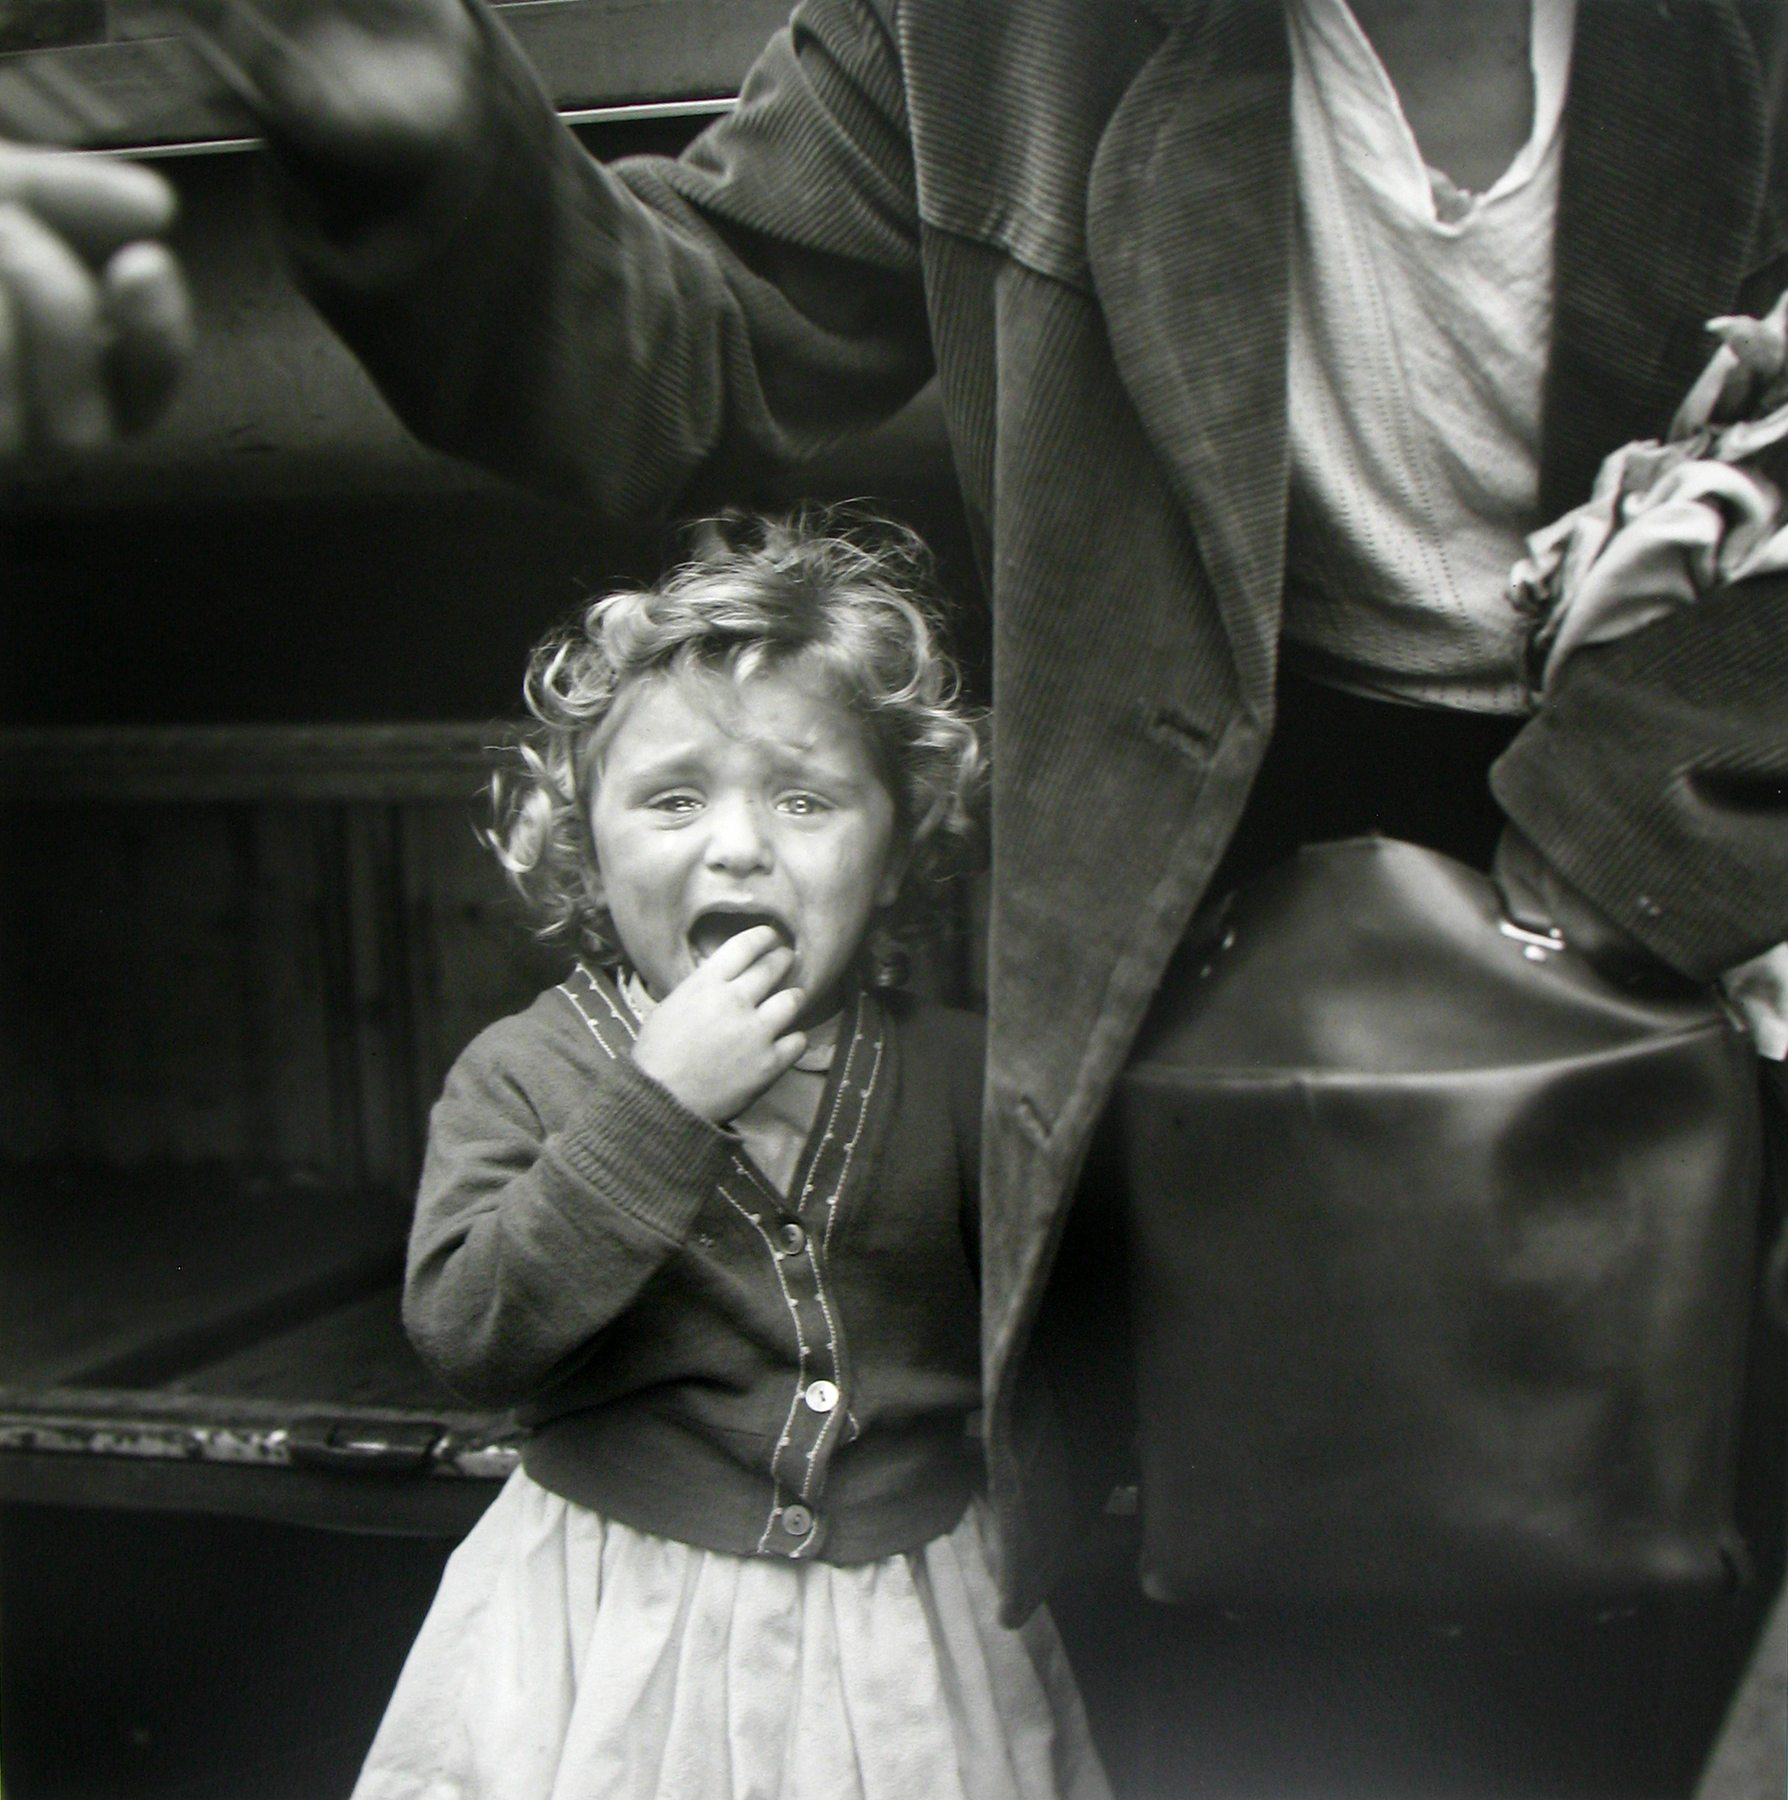 A child cries in a photo from 1959.